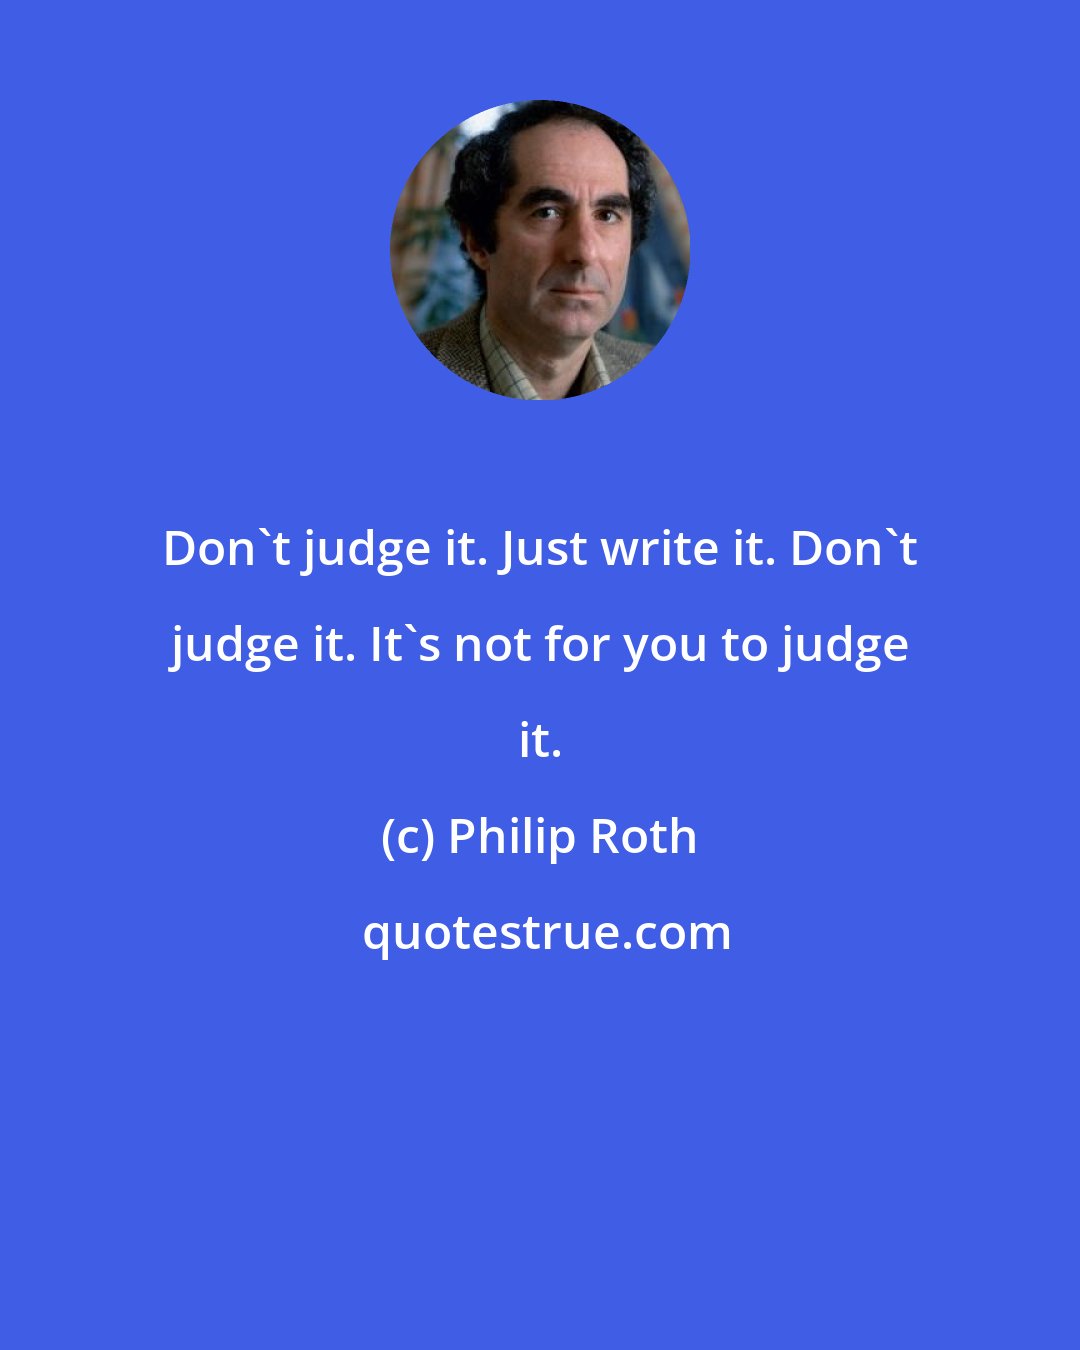 Philip Roth: Don't judge it. Just write it. Don't judge it. It's not for you to judge it.